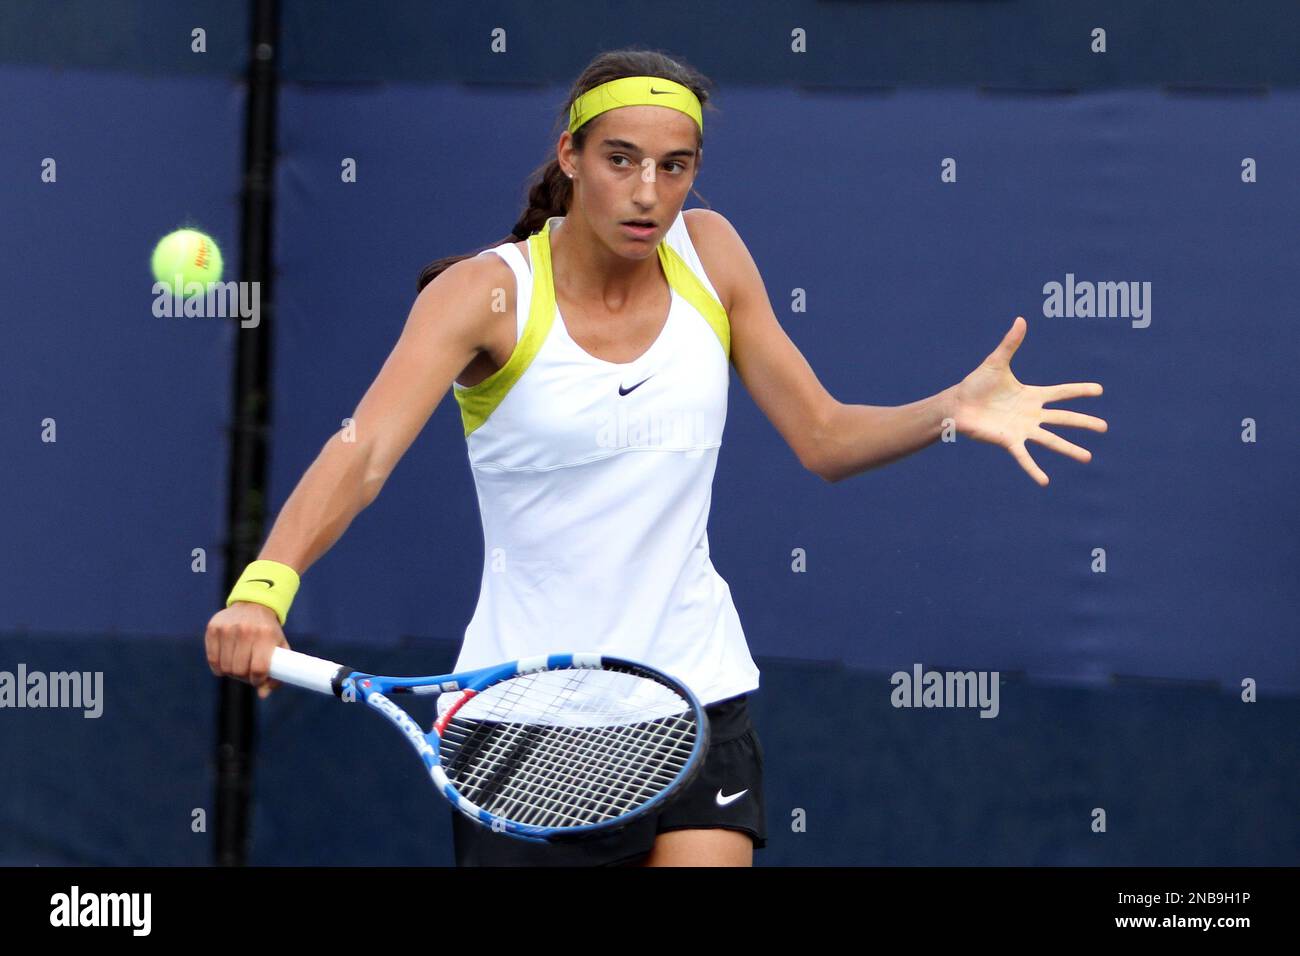 Caroline Garcia of France is seen in action during her match against So-Ra  Lee of Korea during the U.S. Open tennis tournament in New York, Sunday,  Sept. 4, 2011. Garcia won in